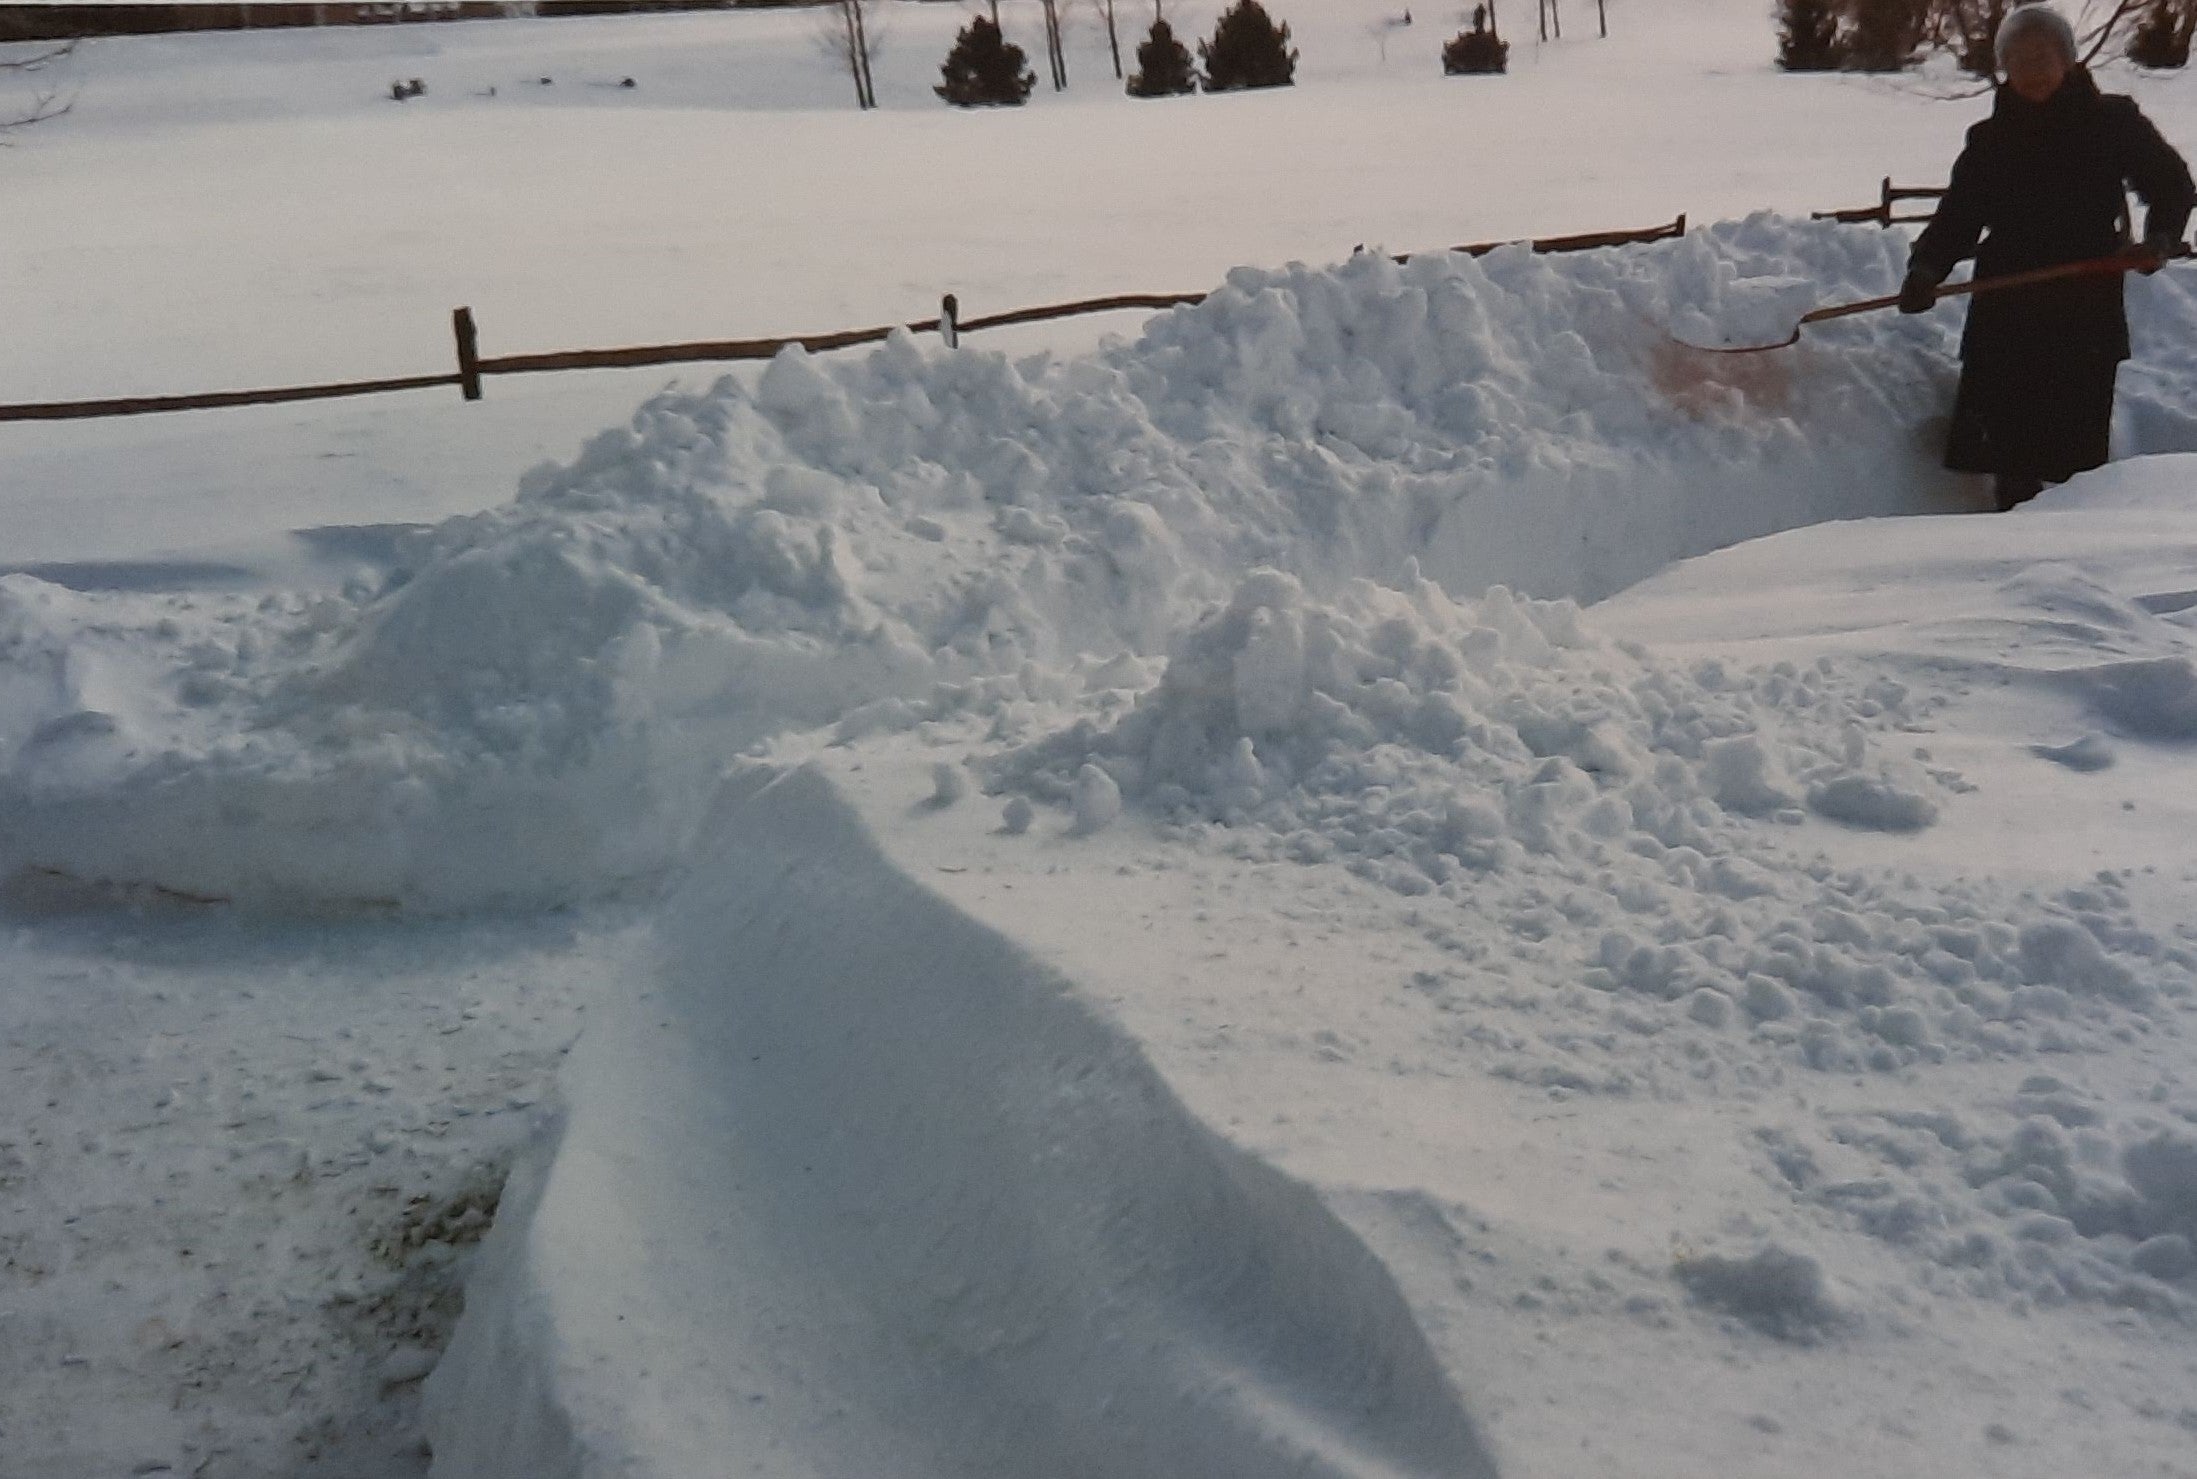 large snow drifts, and Dorothy shoveling